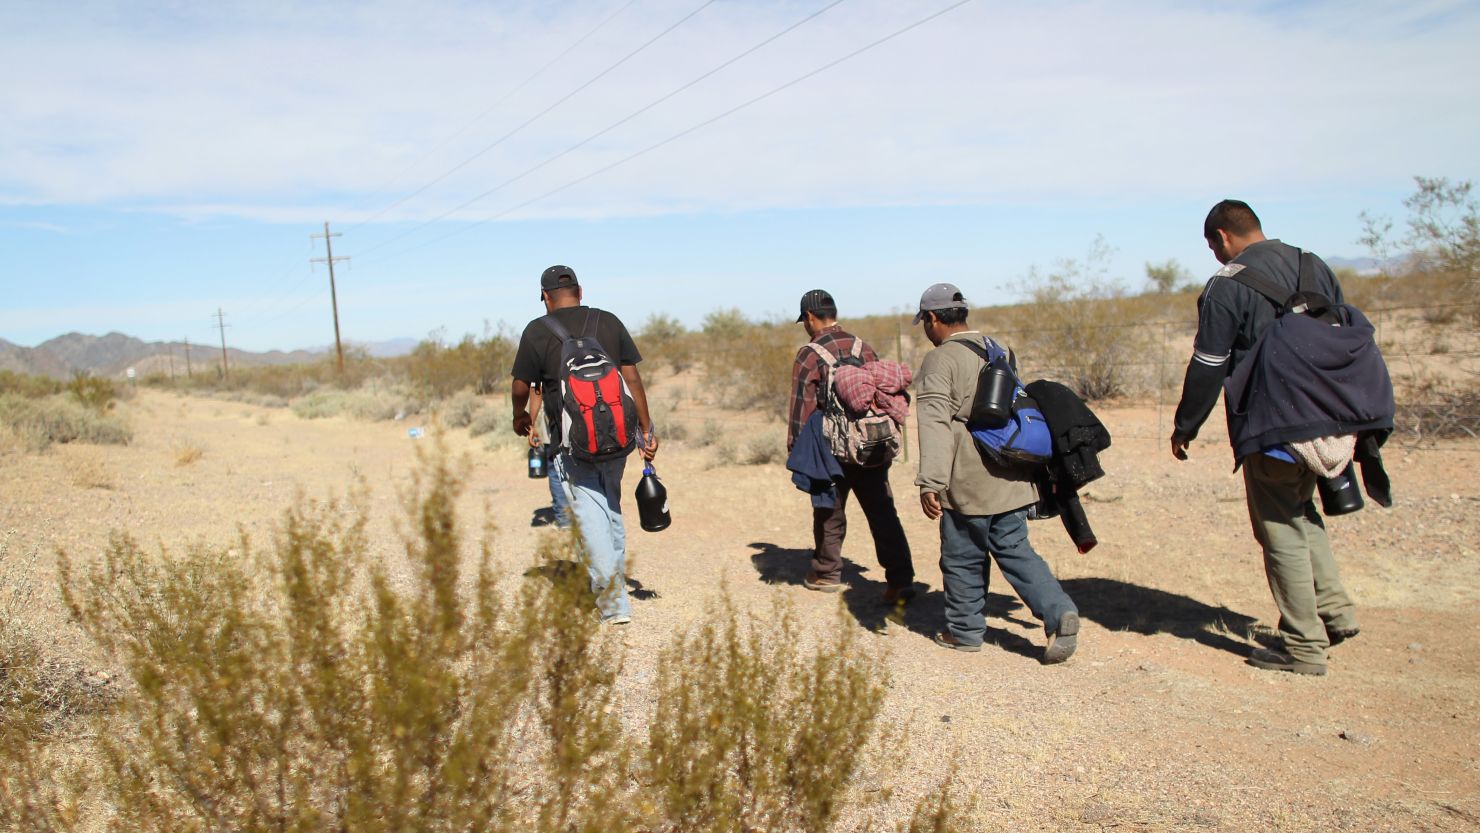 People trying to enter Arizona from Mexico report being mistreated by U.S. Border Patrol agents, a humanitarian group says.